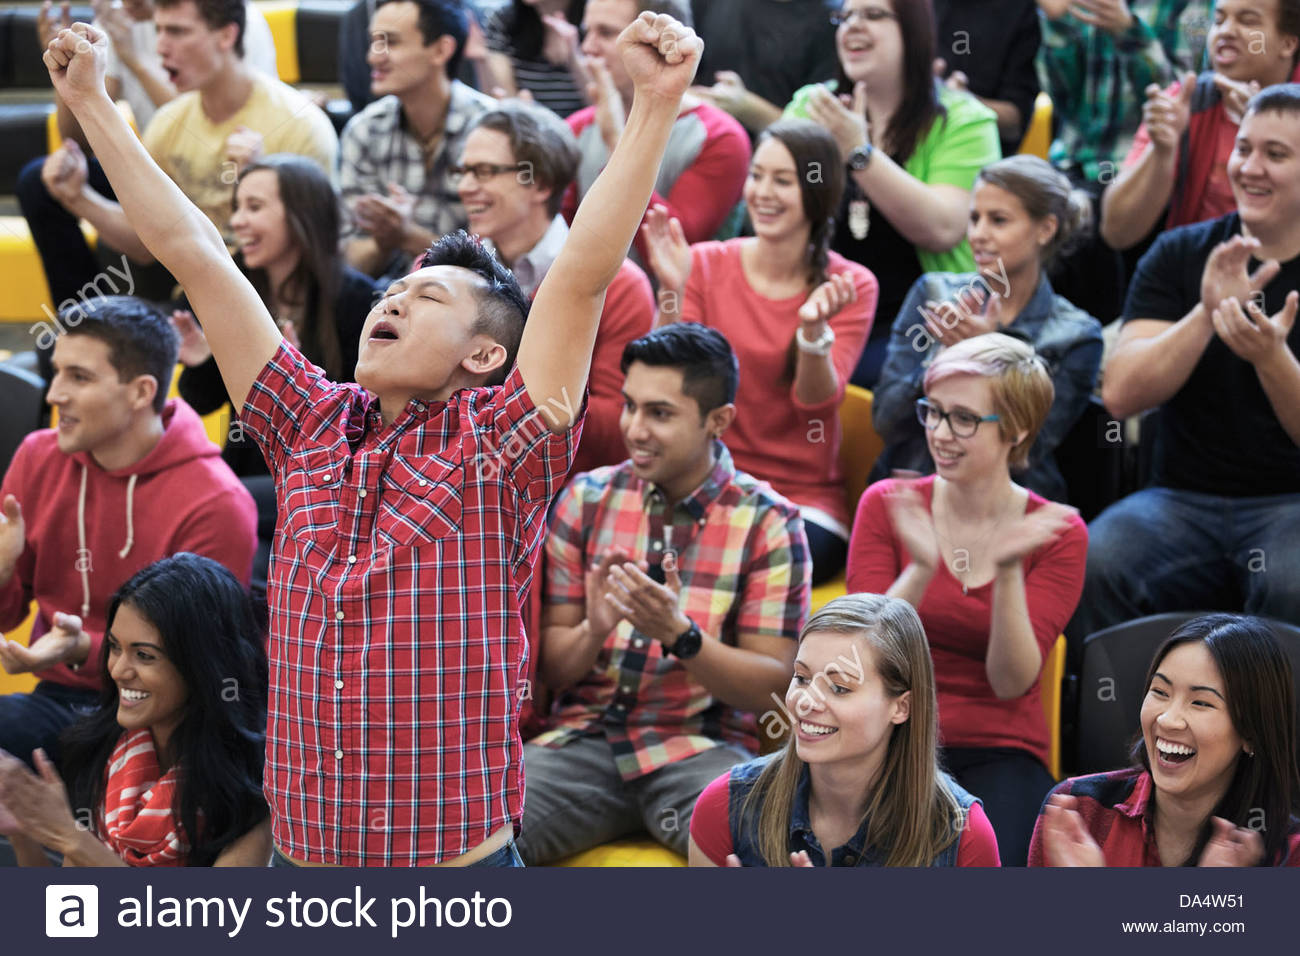 Male student cheering at college sporting event Stock Photo